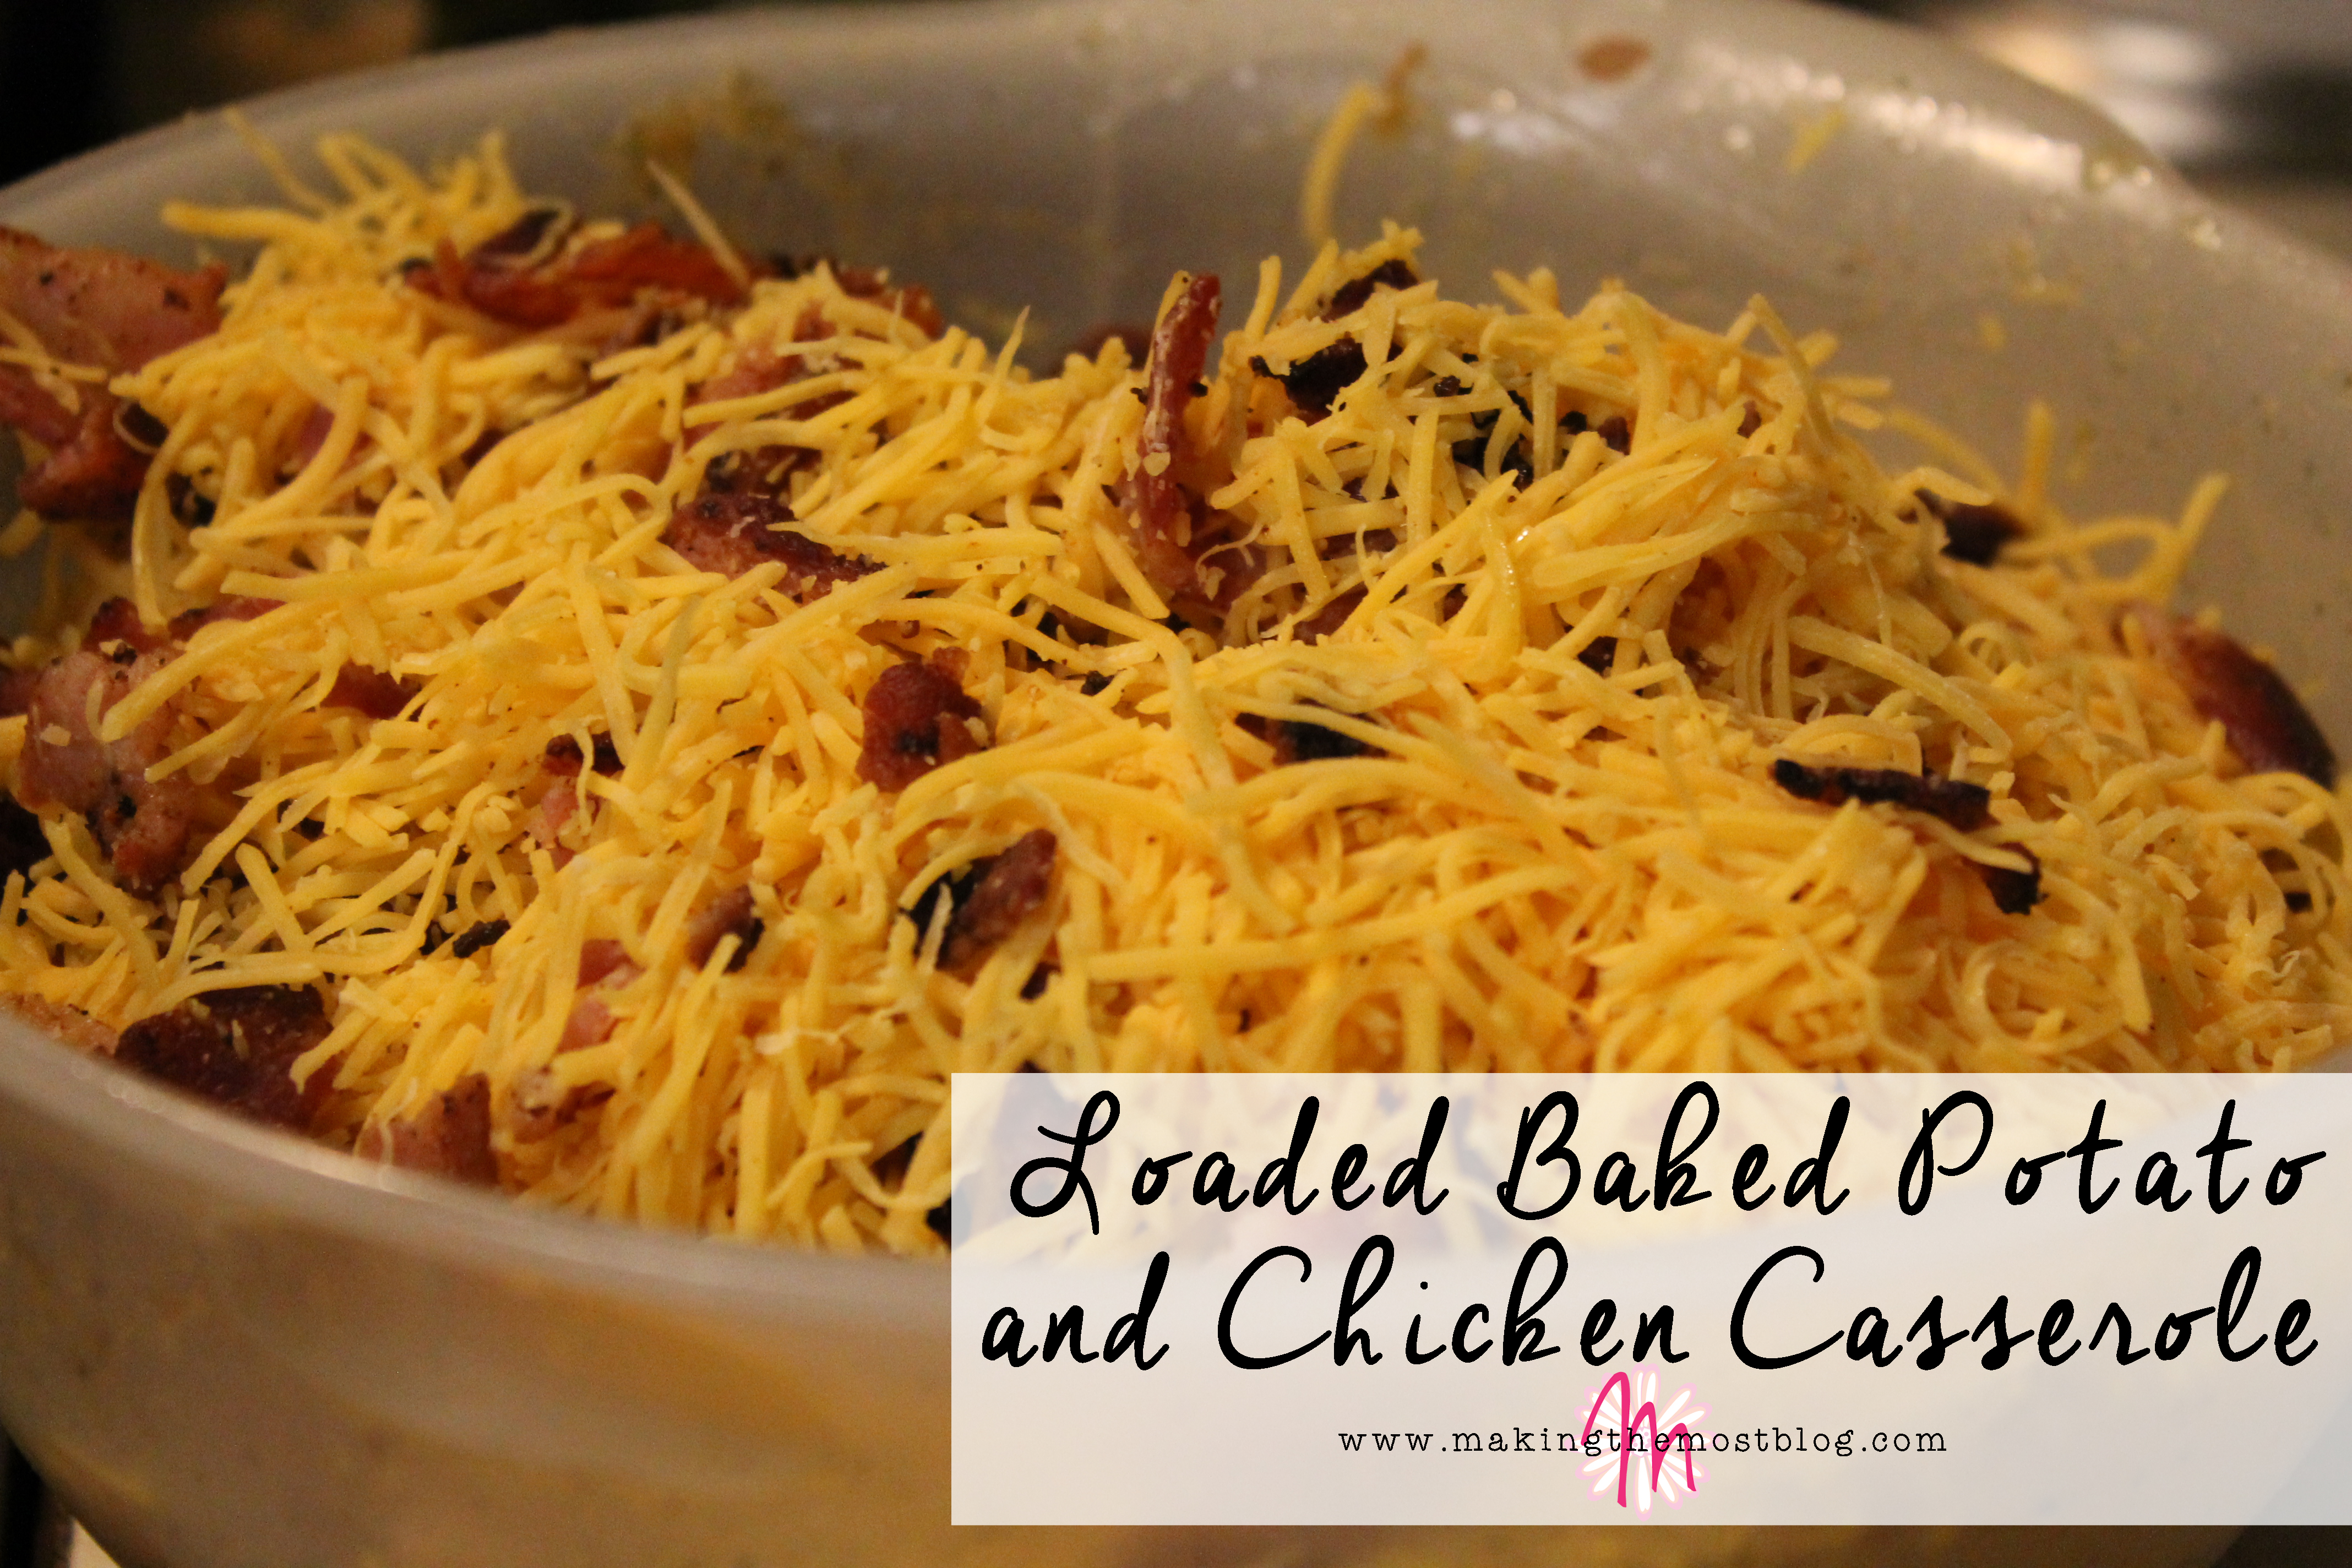 Loaded Baked Potato and Chicken Casserole | Making the Most Blog